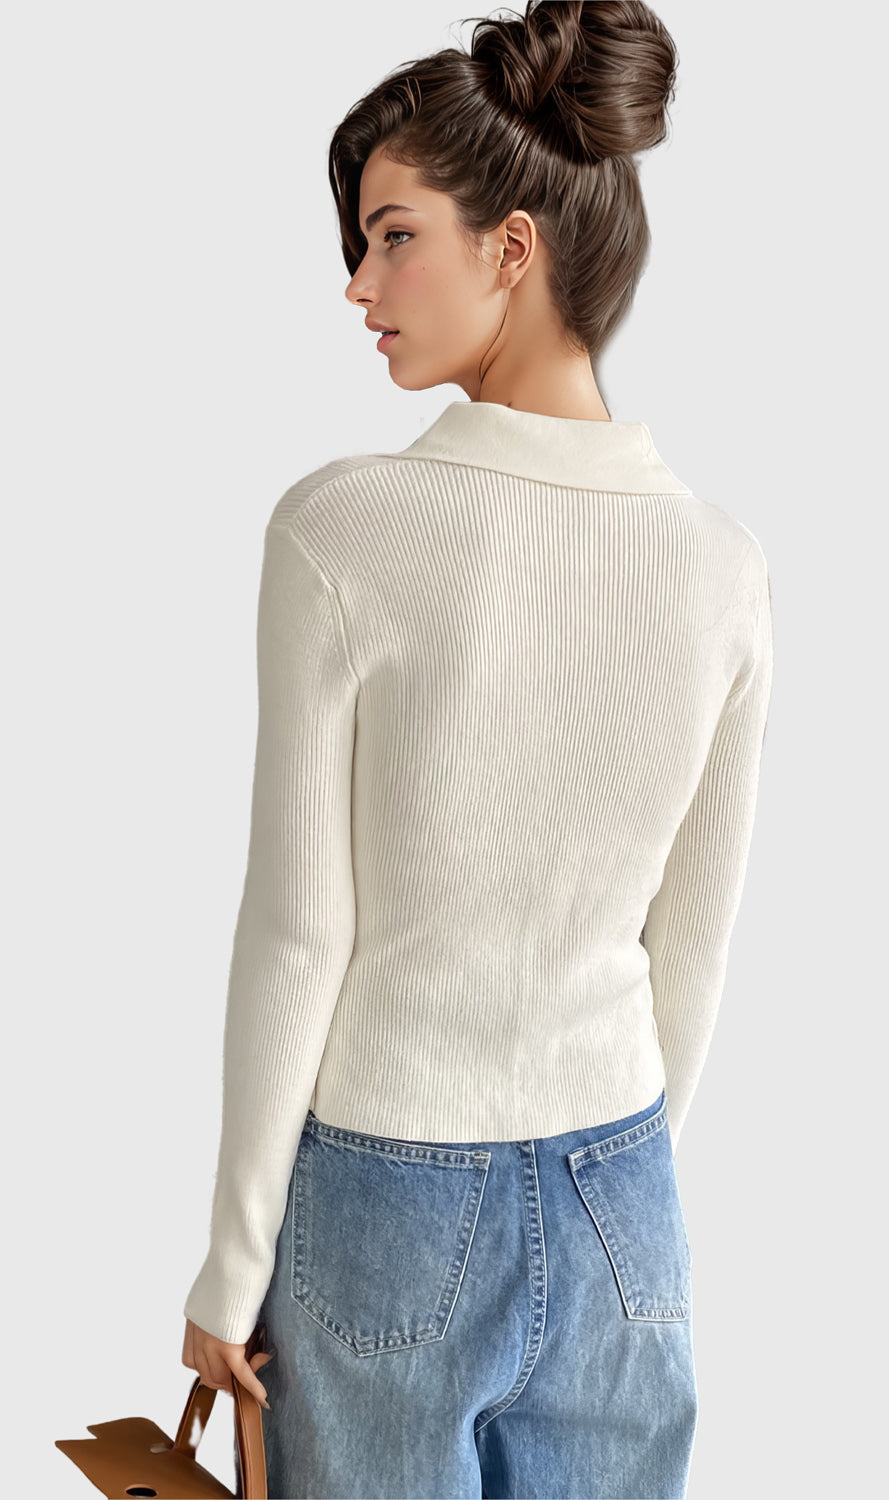 Knitted Top with Collar and Irregular Hem - White